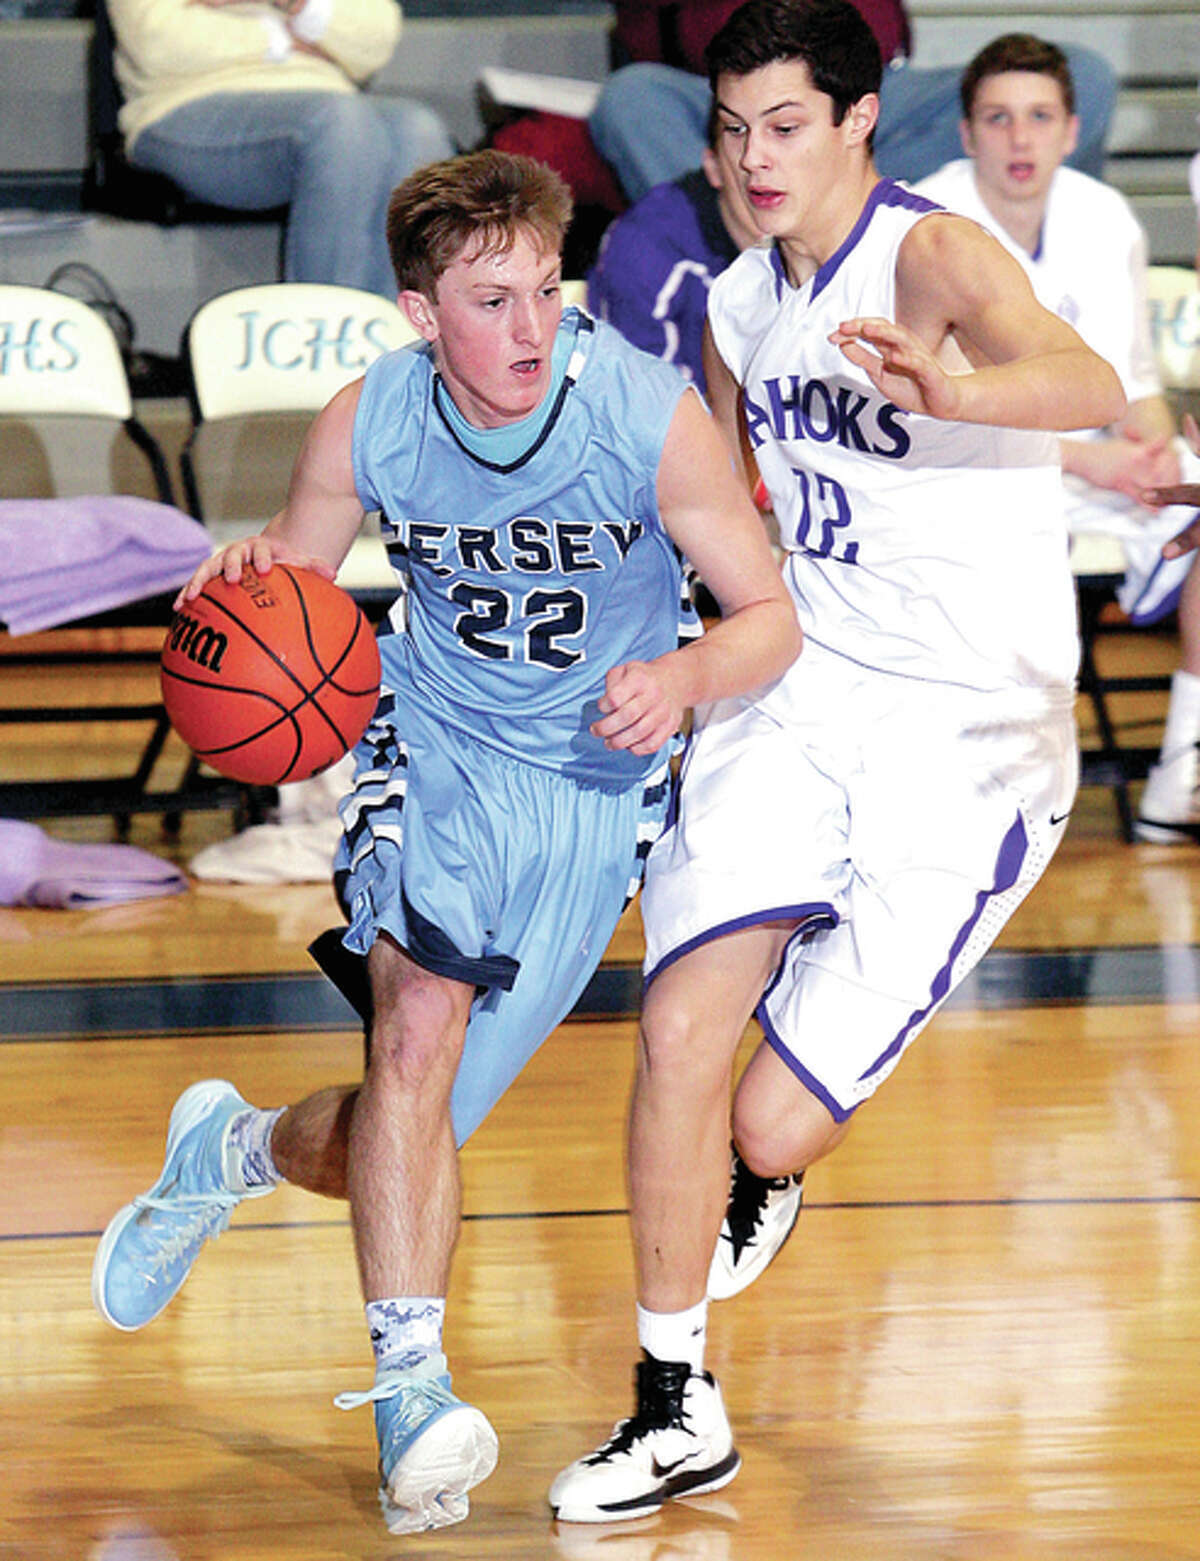 Jersey’s Zac Ridenhour, left, scored 18 points Tuesday in his team’s win over Triad. He is shown in 2015 action against Collinsville’s Zach Flora.